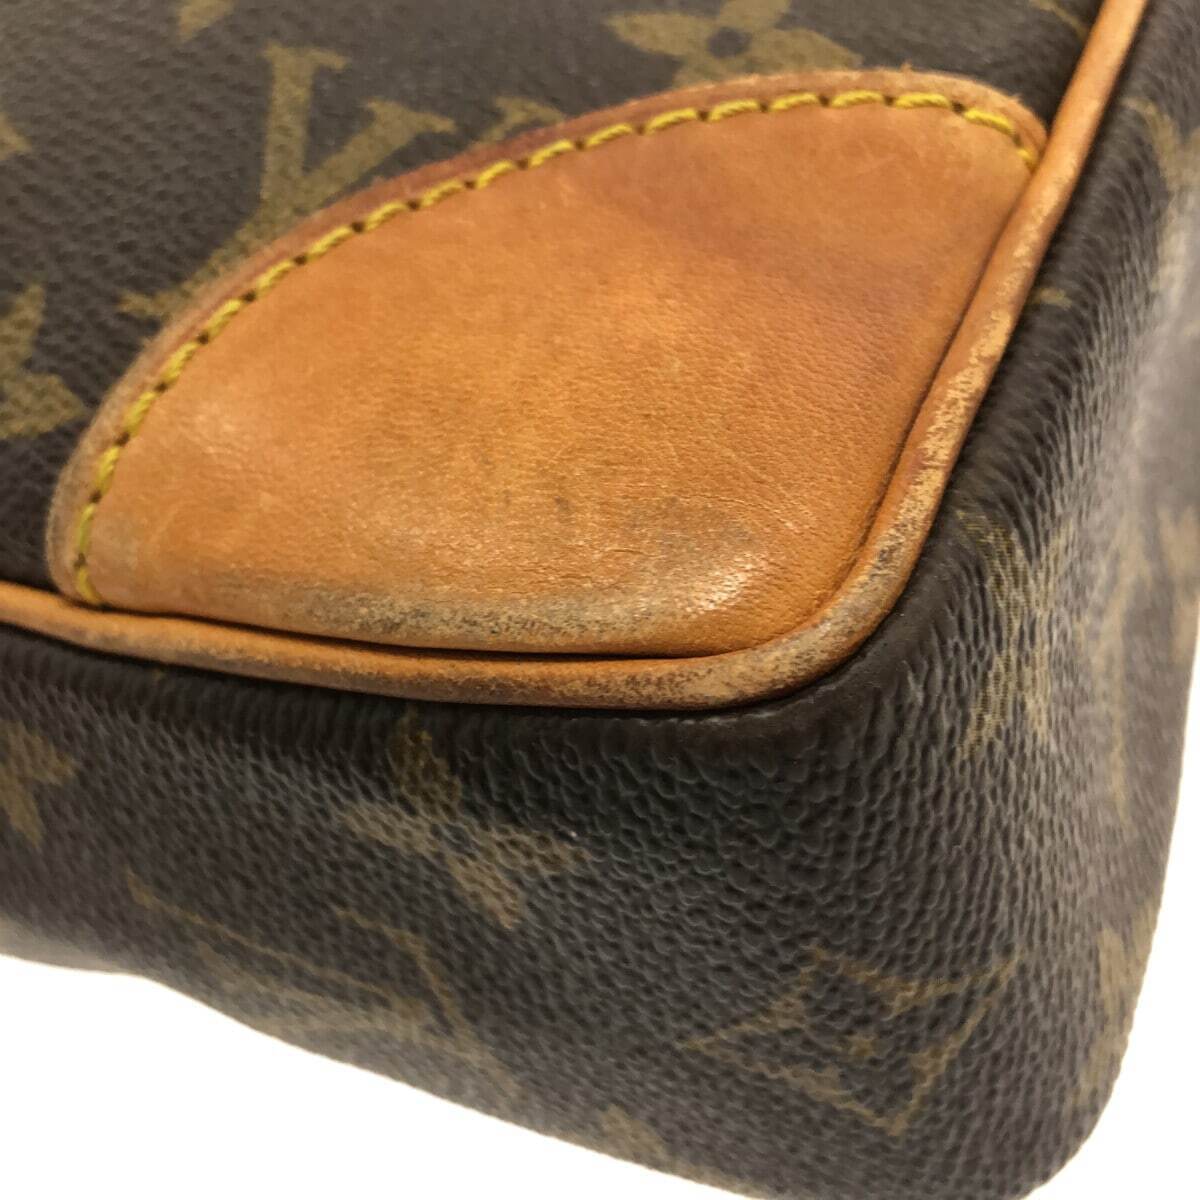 LOUIS VUITTON Coated Canvas and Vachetta Leather Porte Documents